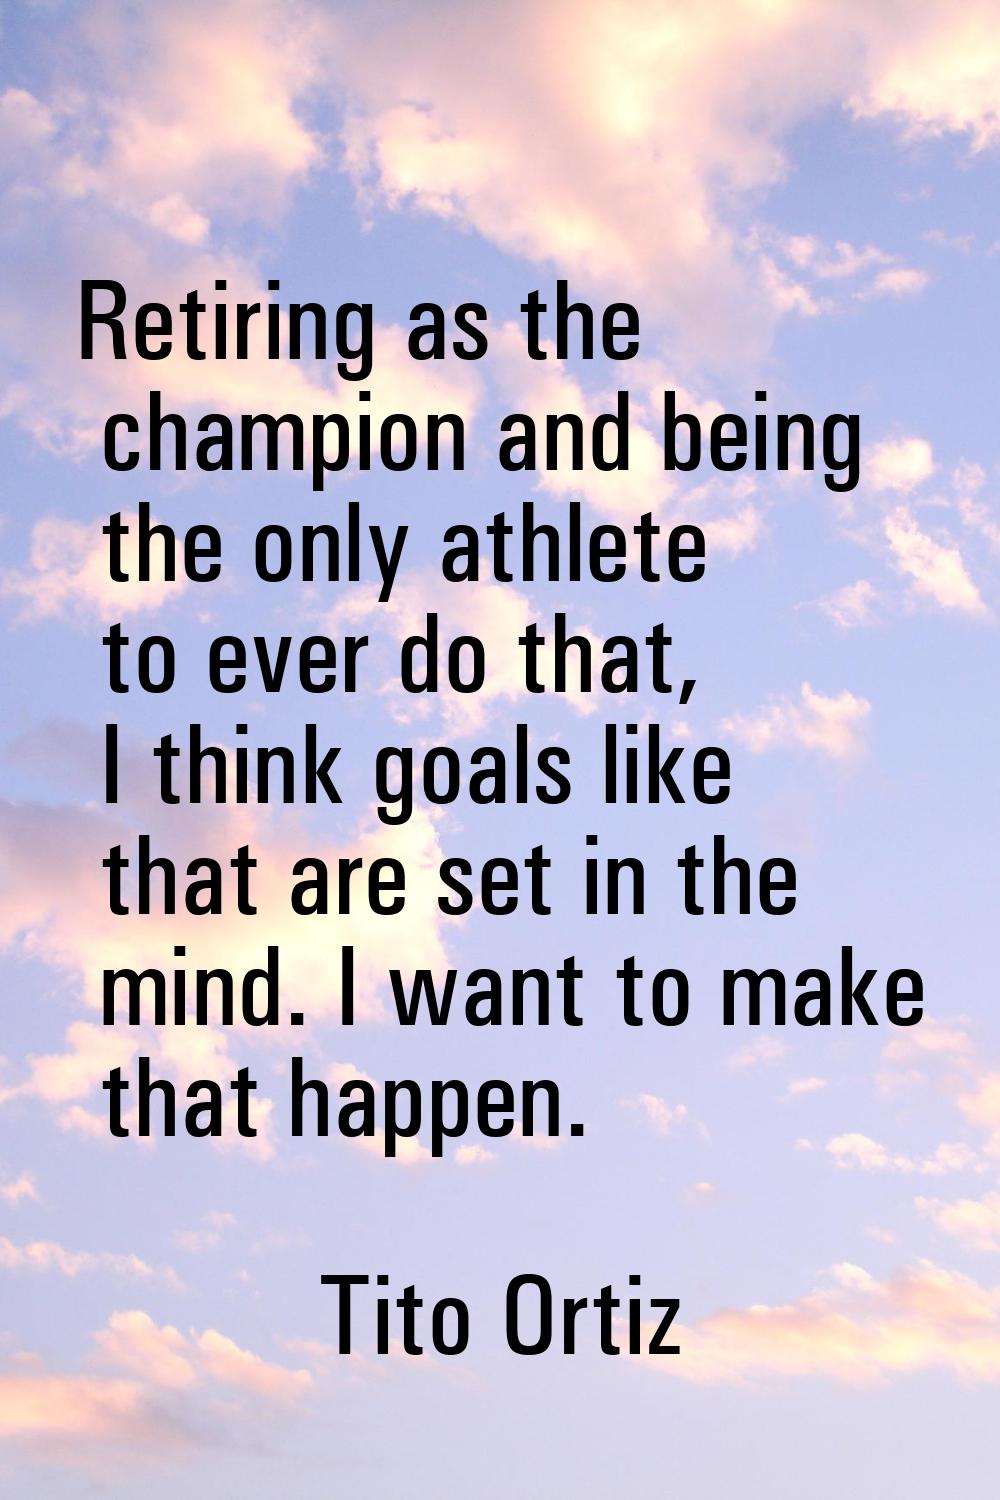 Retiring as the champion and being the only athlete to ever do that, I think goals like that are se